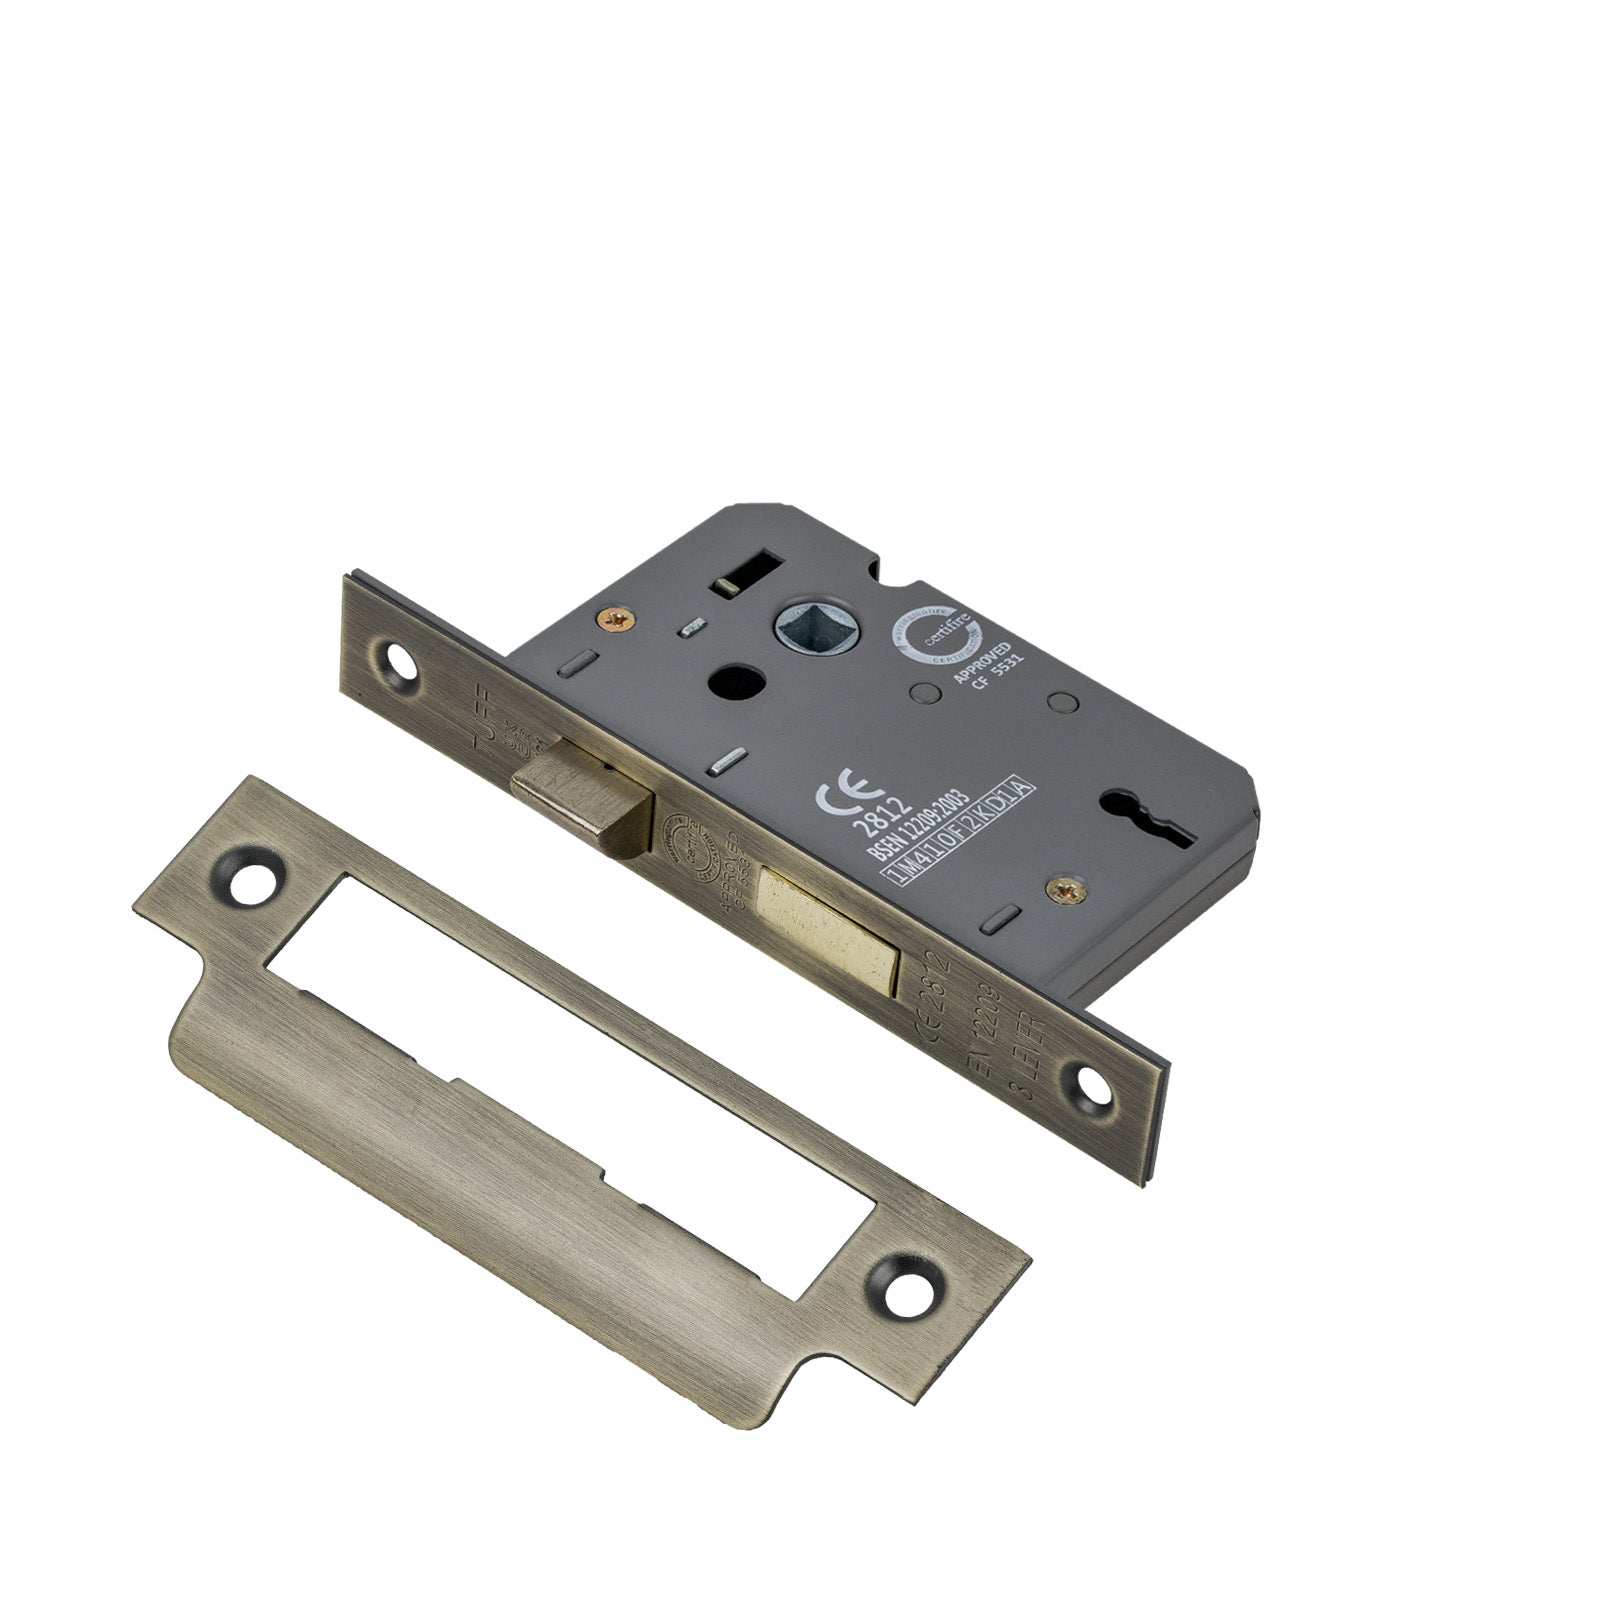 SHOW 3 Lever Sash Lock - 2.5 Inch with Matt Antique Brass finished forend and striker plate